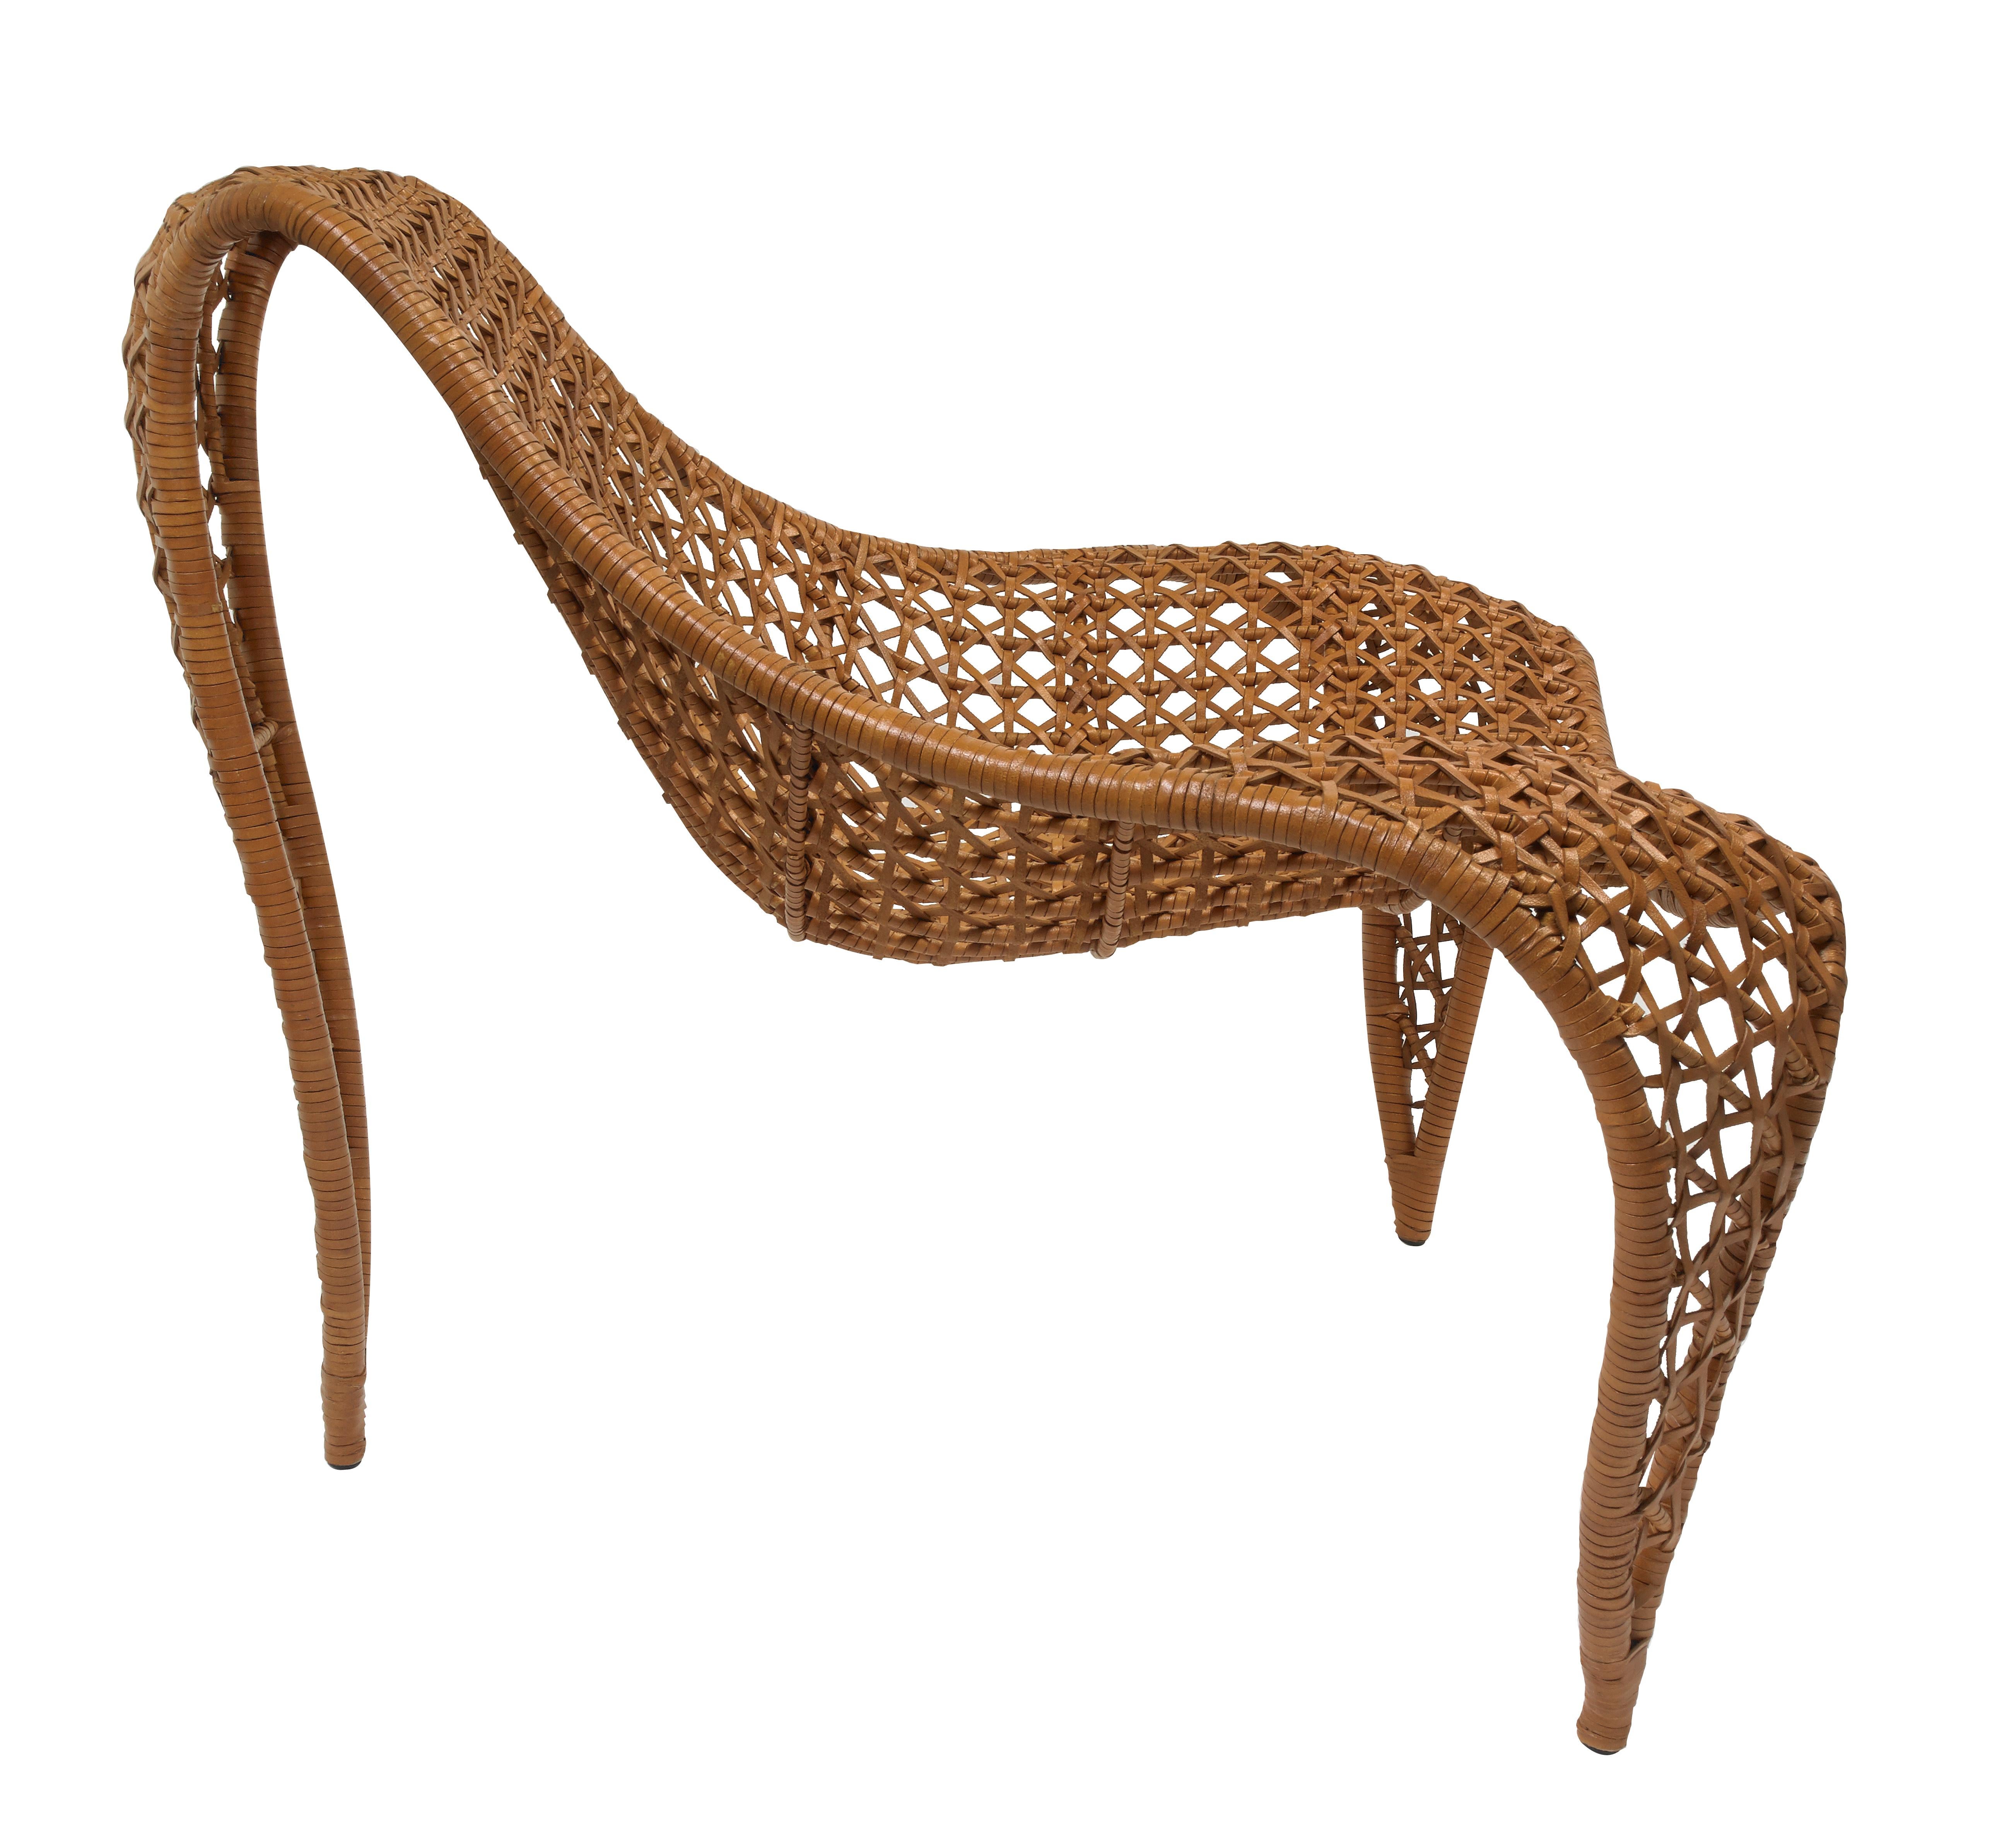 To enhance both style and comfort, supple woven leather gracefully envelops an intriguingly shaped chair.